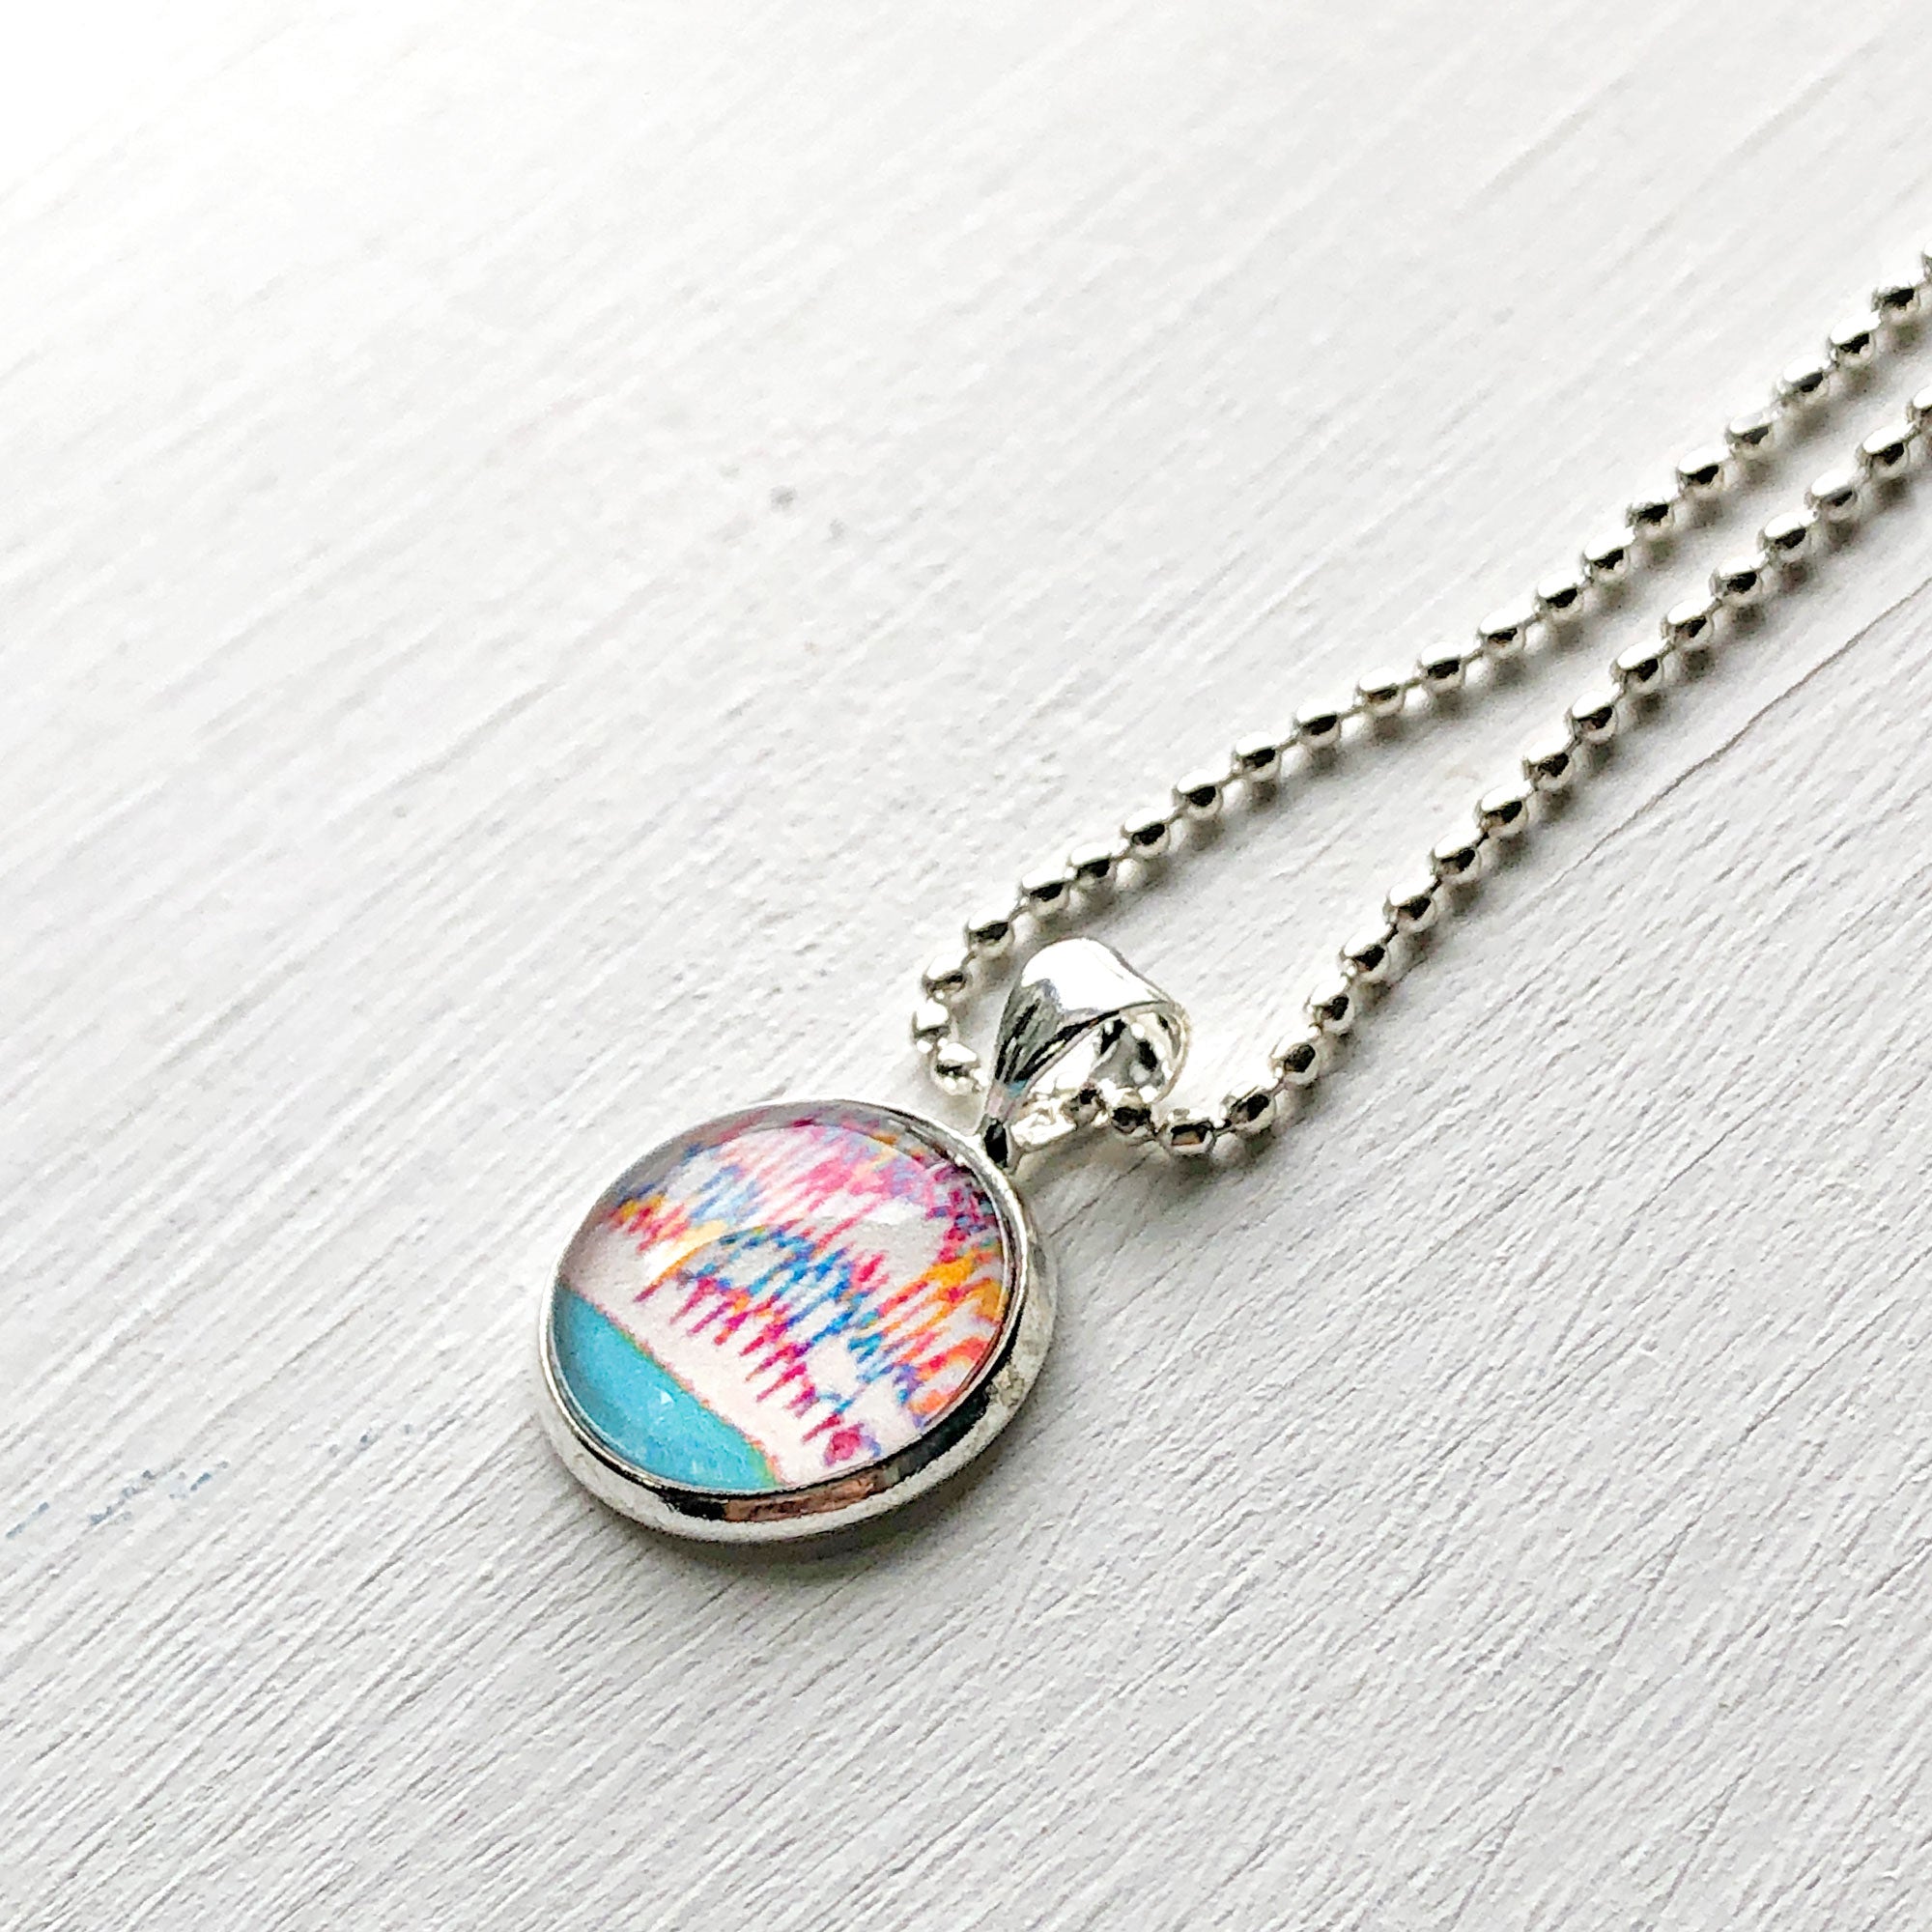 April Showers - Small Round Necklace